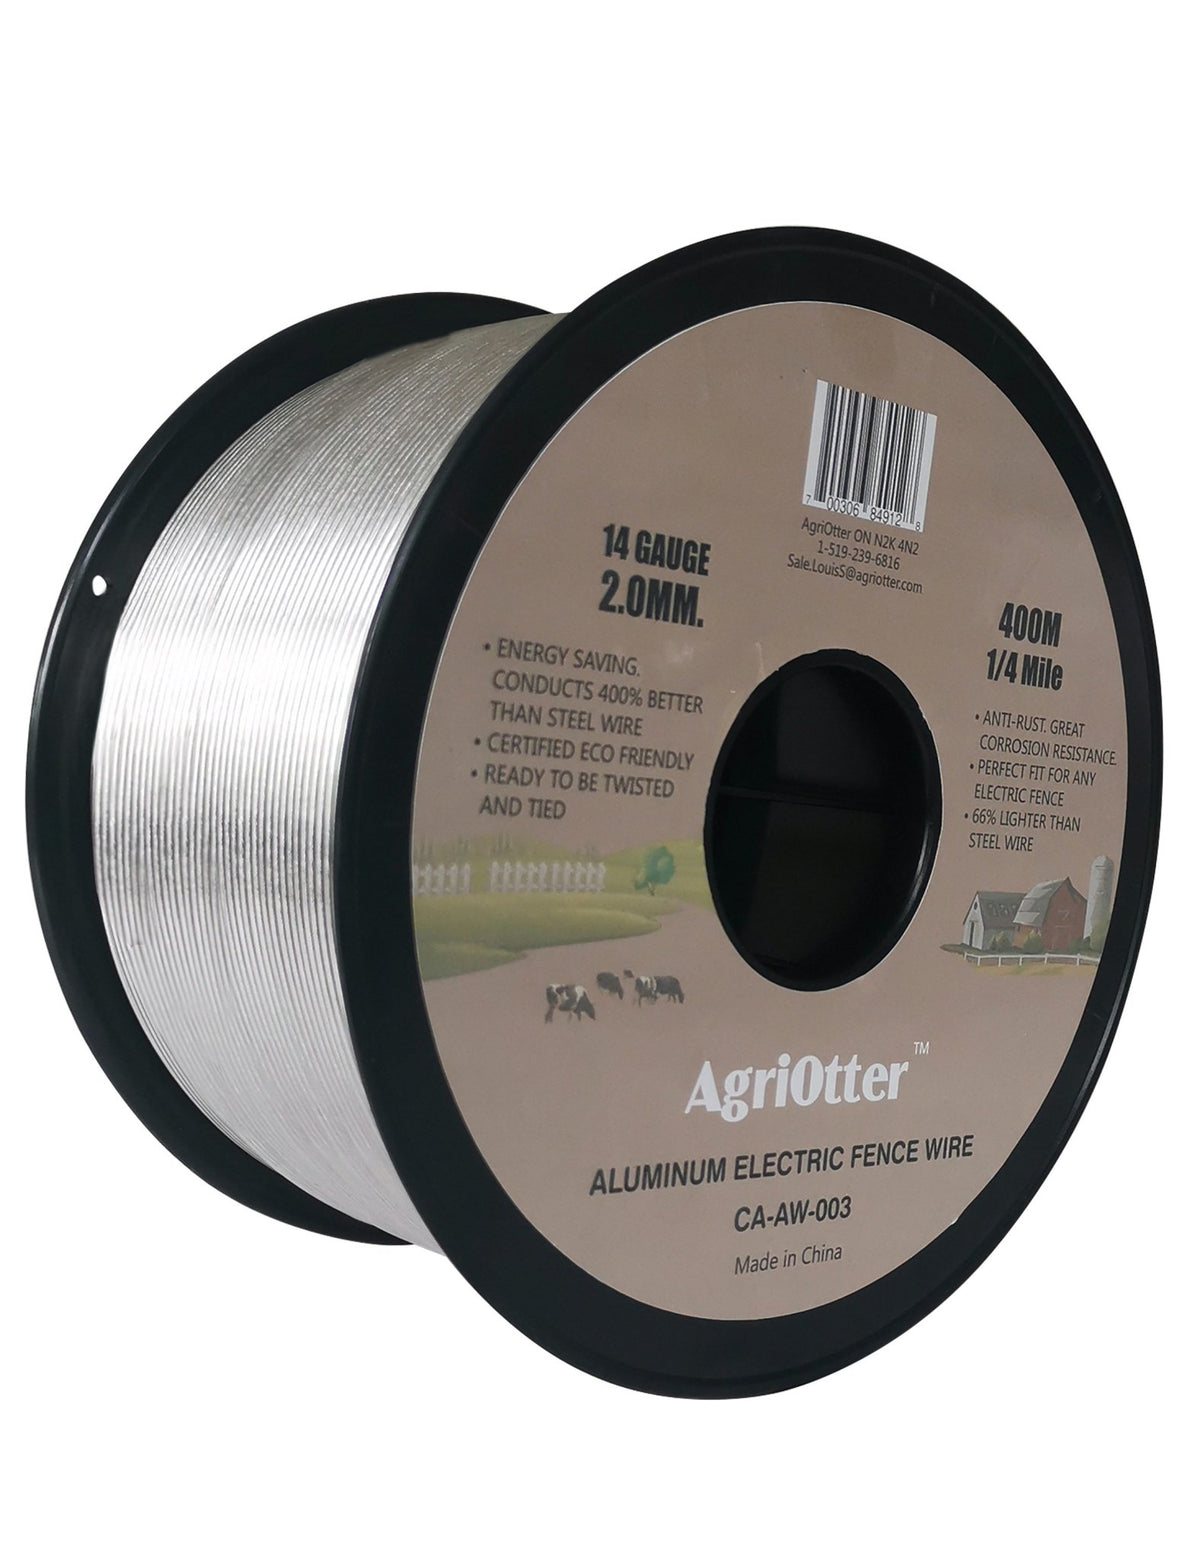 Aluminum Electric Fence Wire for Garden Fence, Electric Fence, 1/4 Mile(400M) 14 Gauge (2.0 mm.) (0.079inch) - AgriOtter